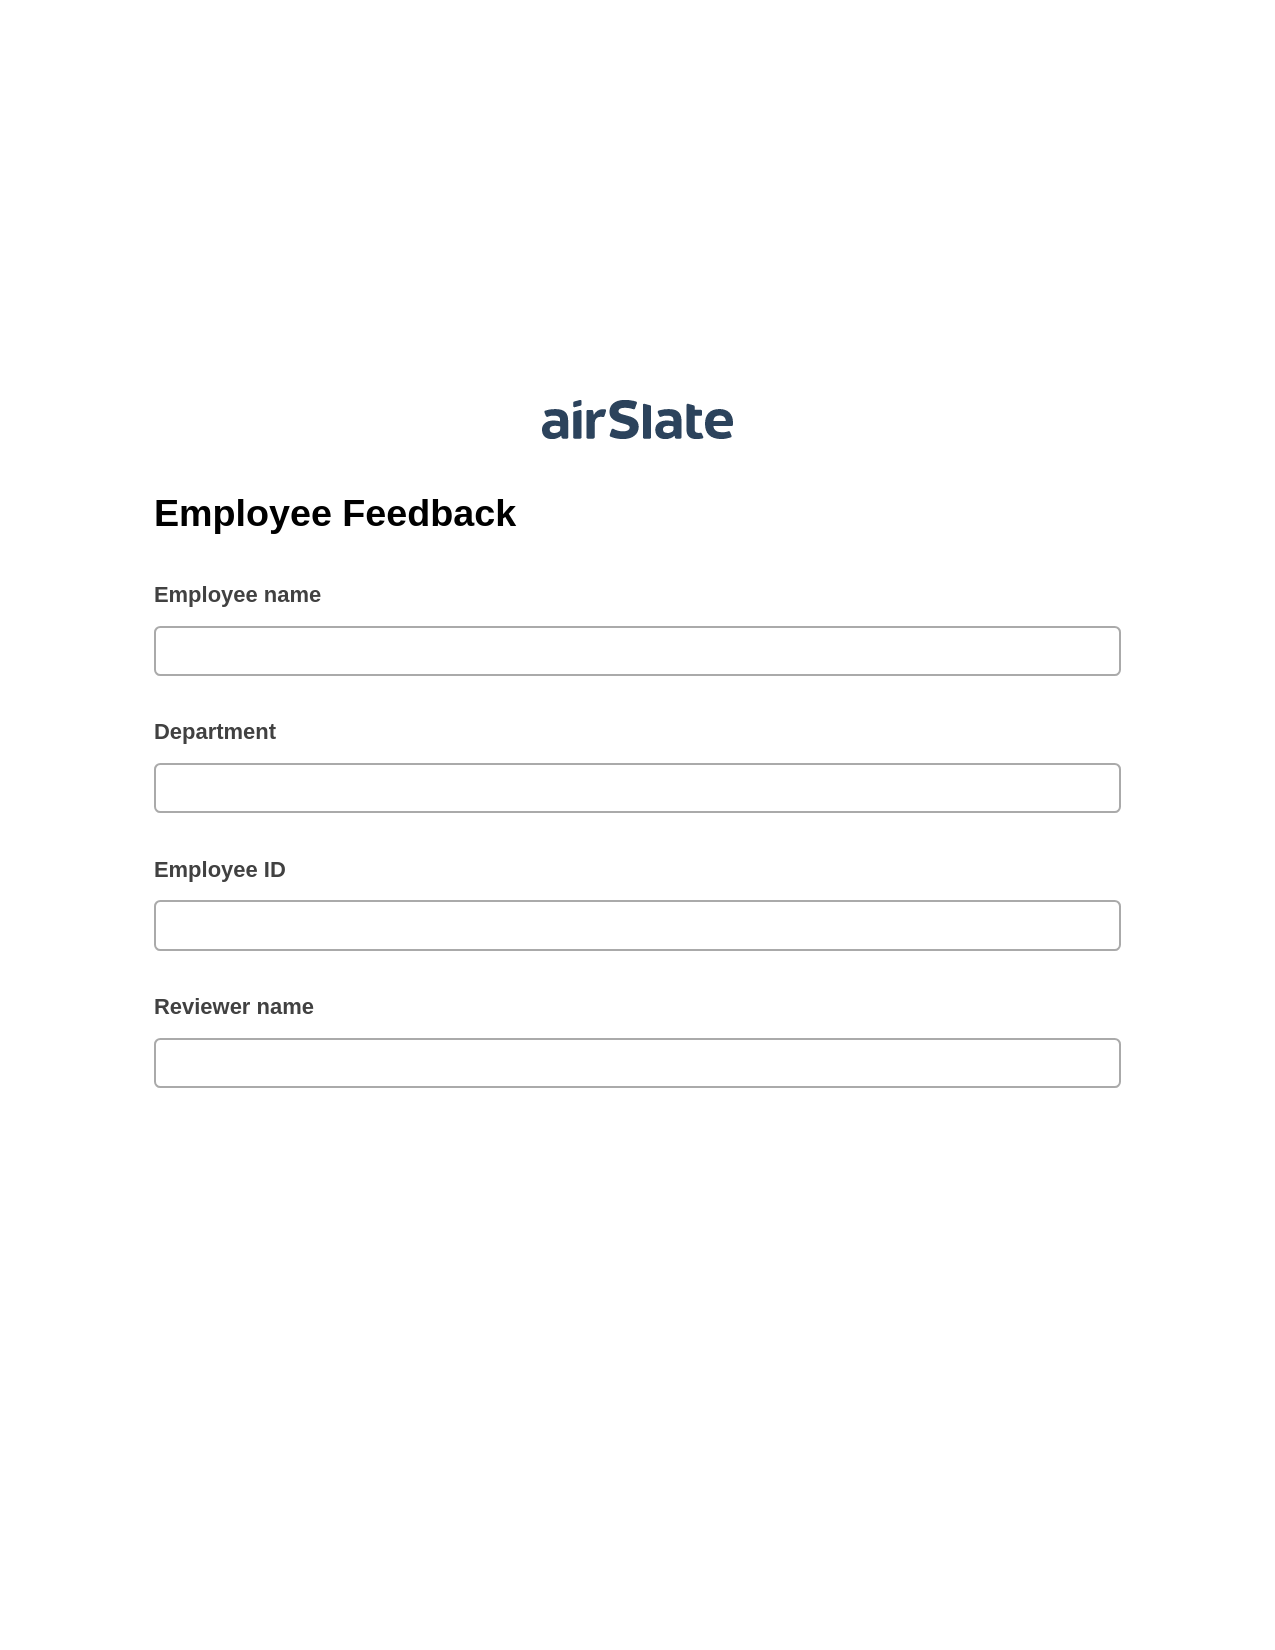 Employee Feedback Pre-fill Slate from MS Dynamics 365 Records Bot, Audit Trail Bot, Post-finish Document Bot